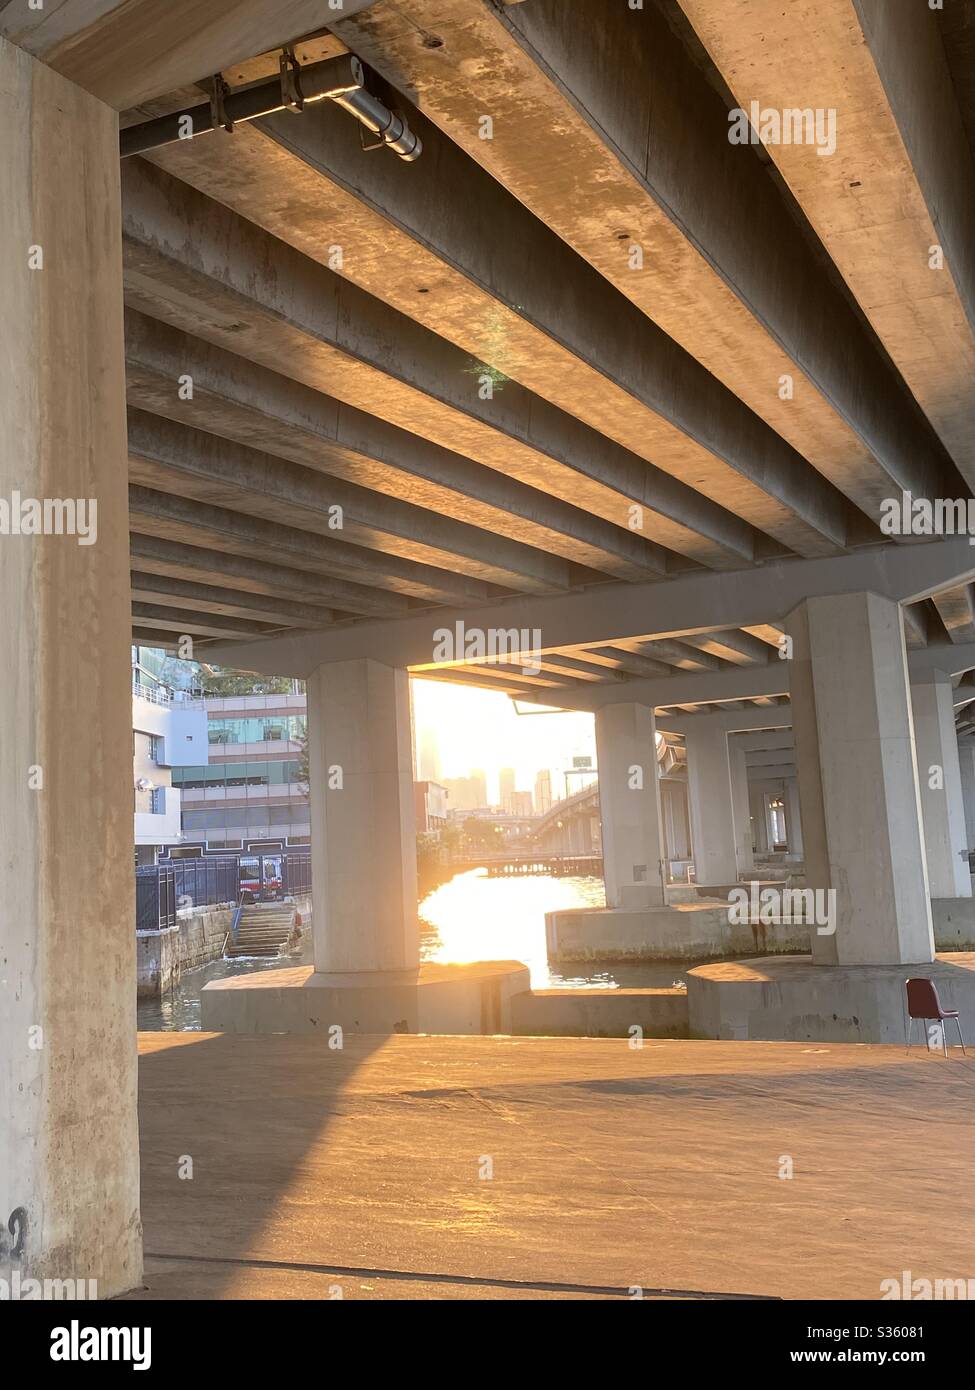 Ray of golden sunlight taking from below a highway bridge Stock Photo